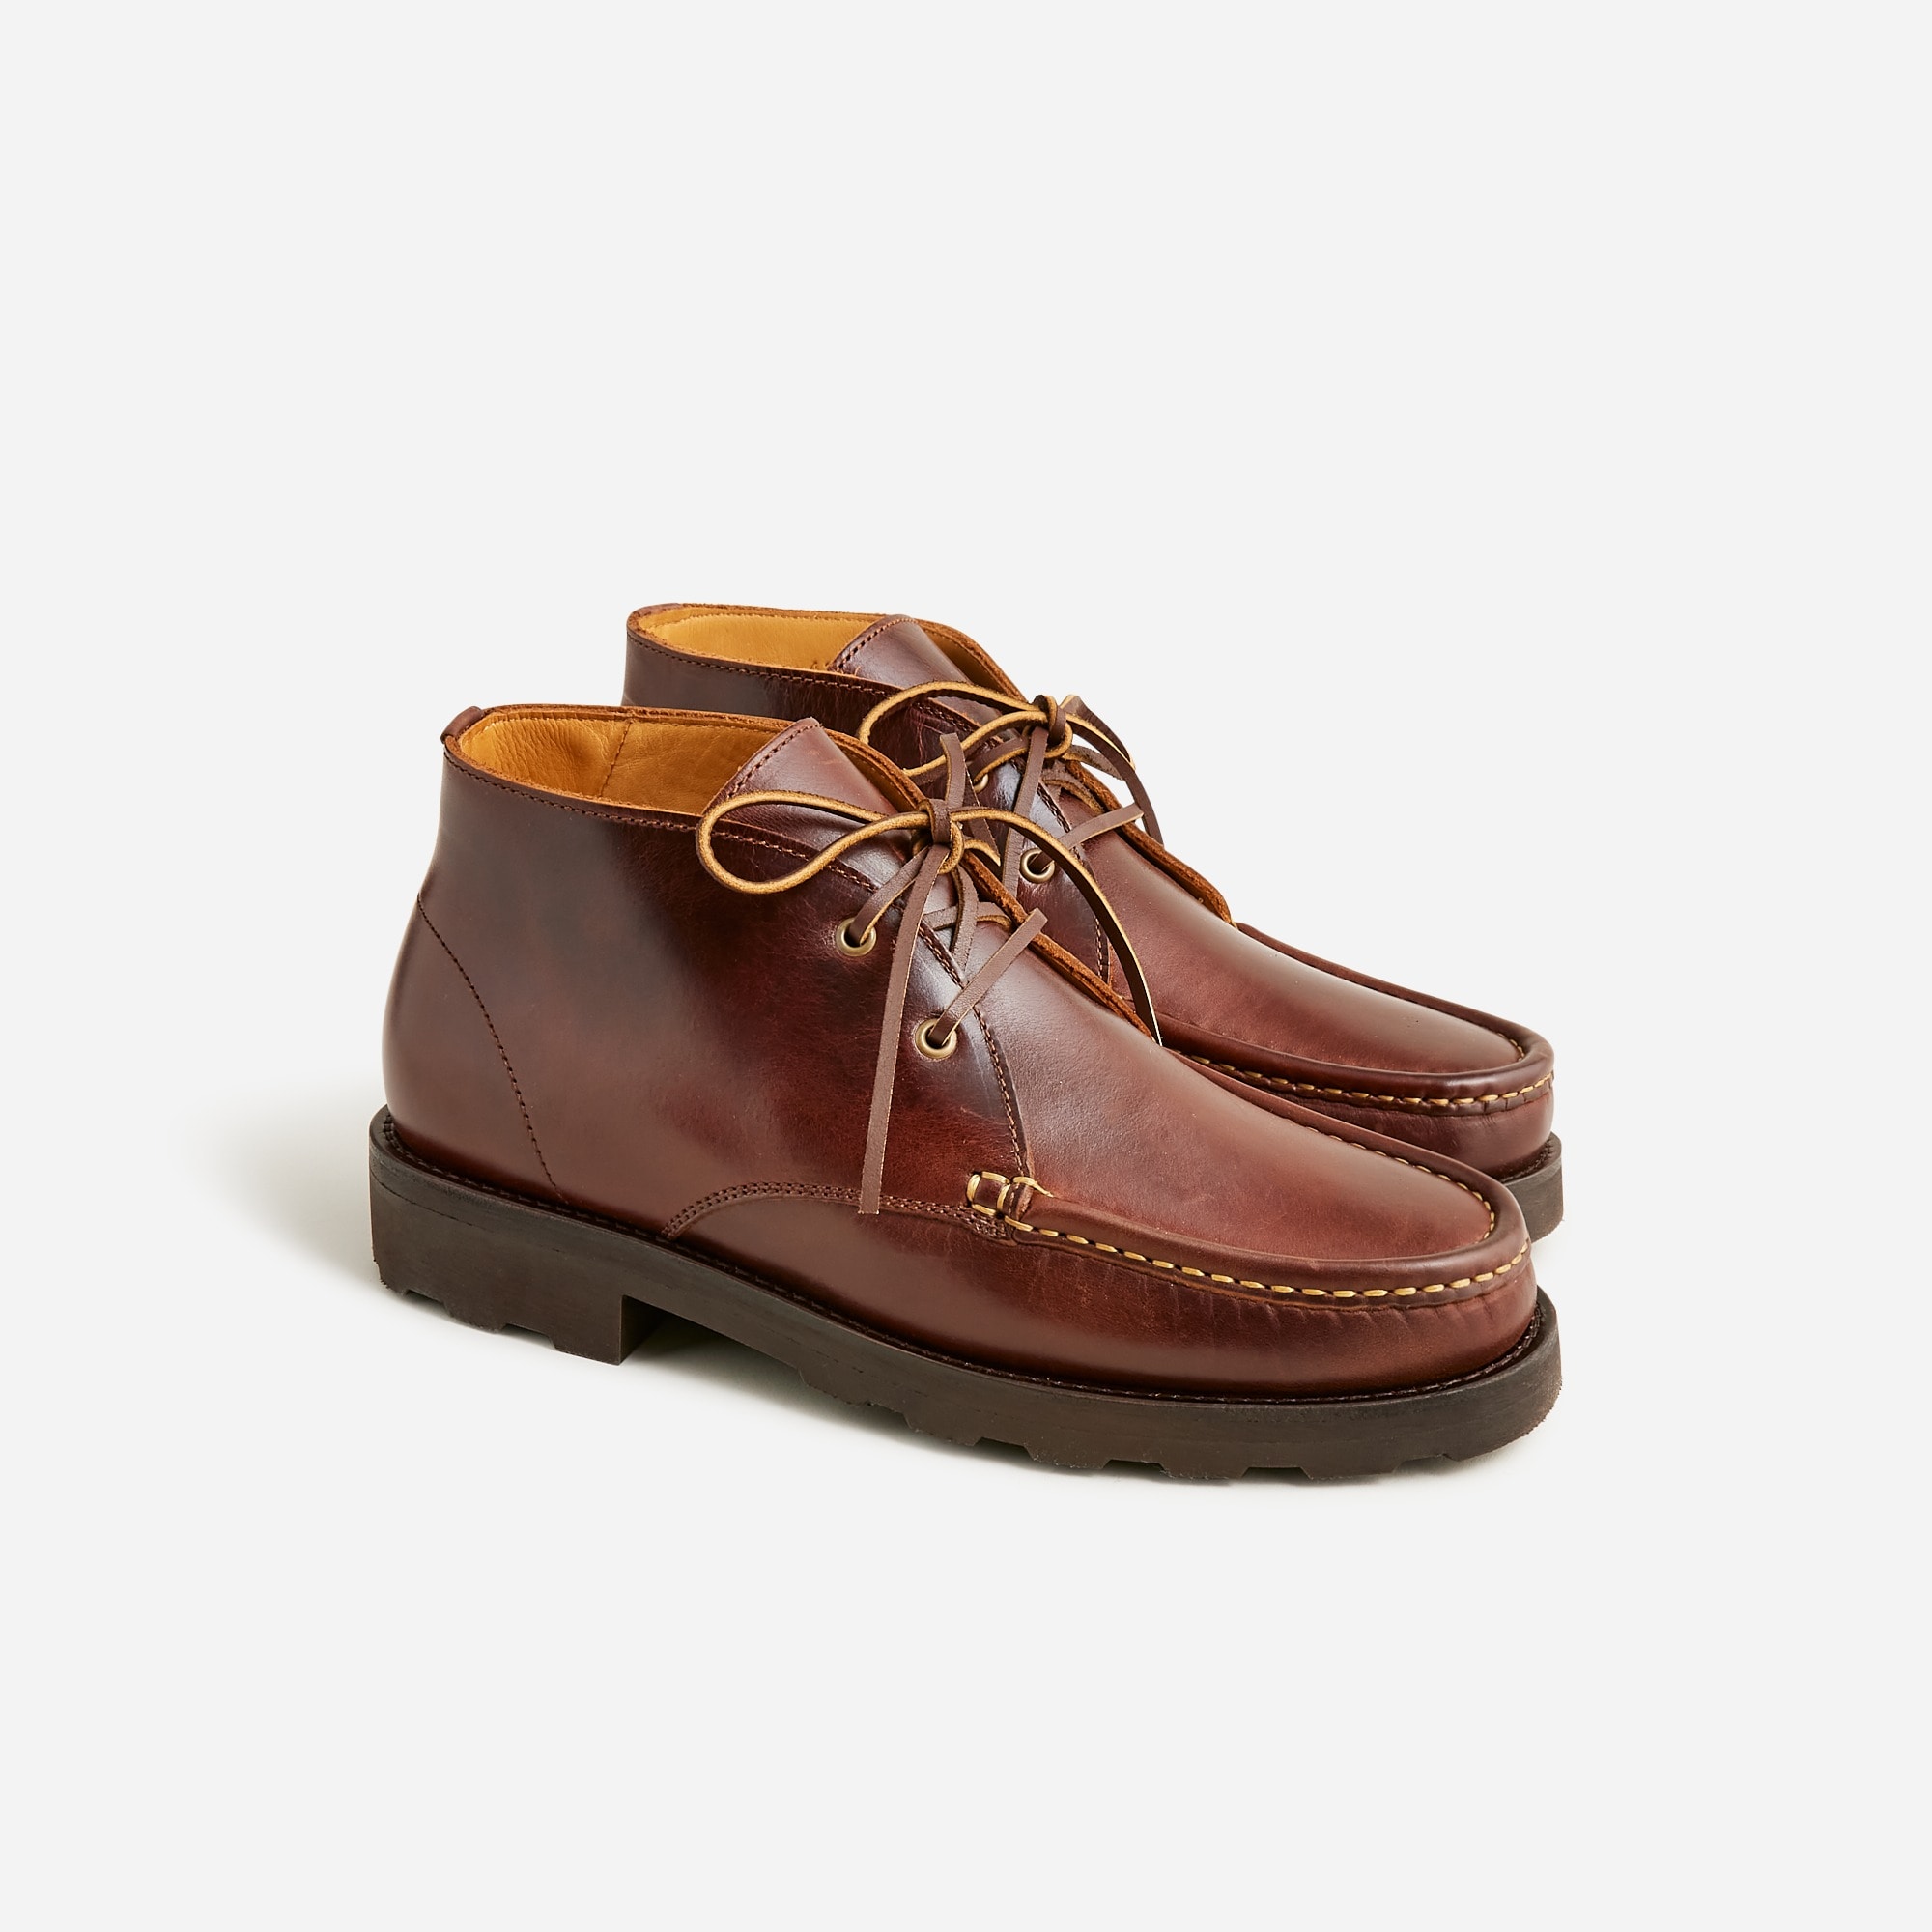 Jcrew Paraboot Maine leather boot